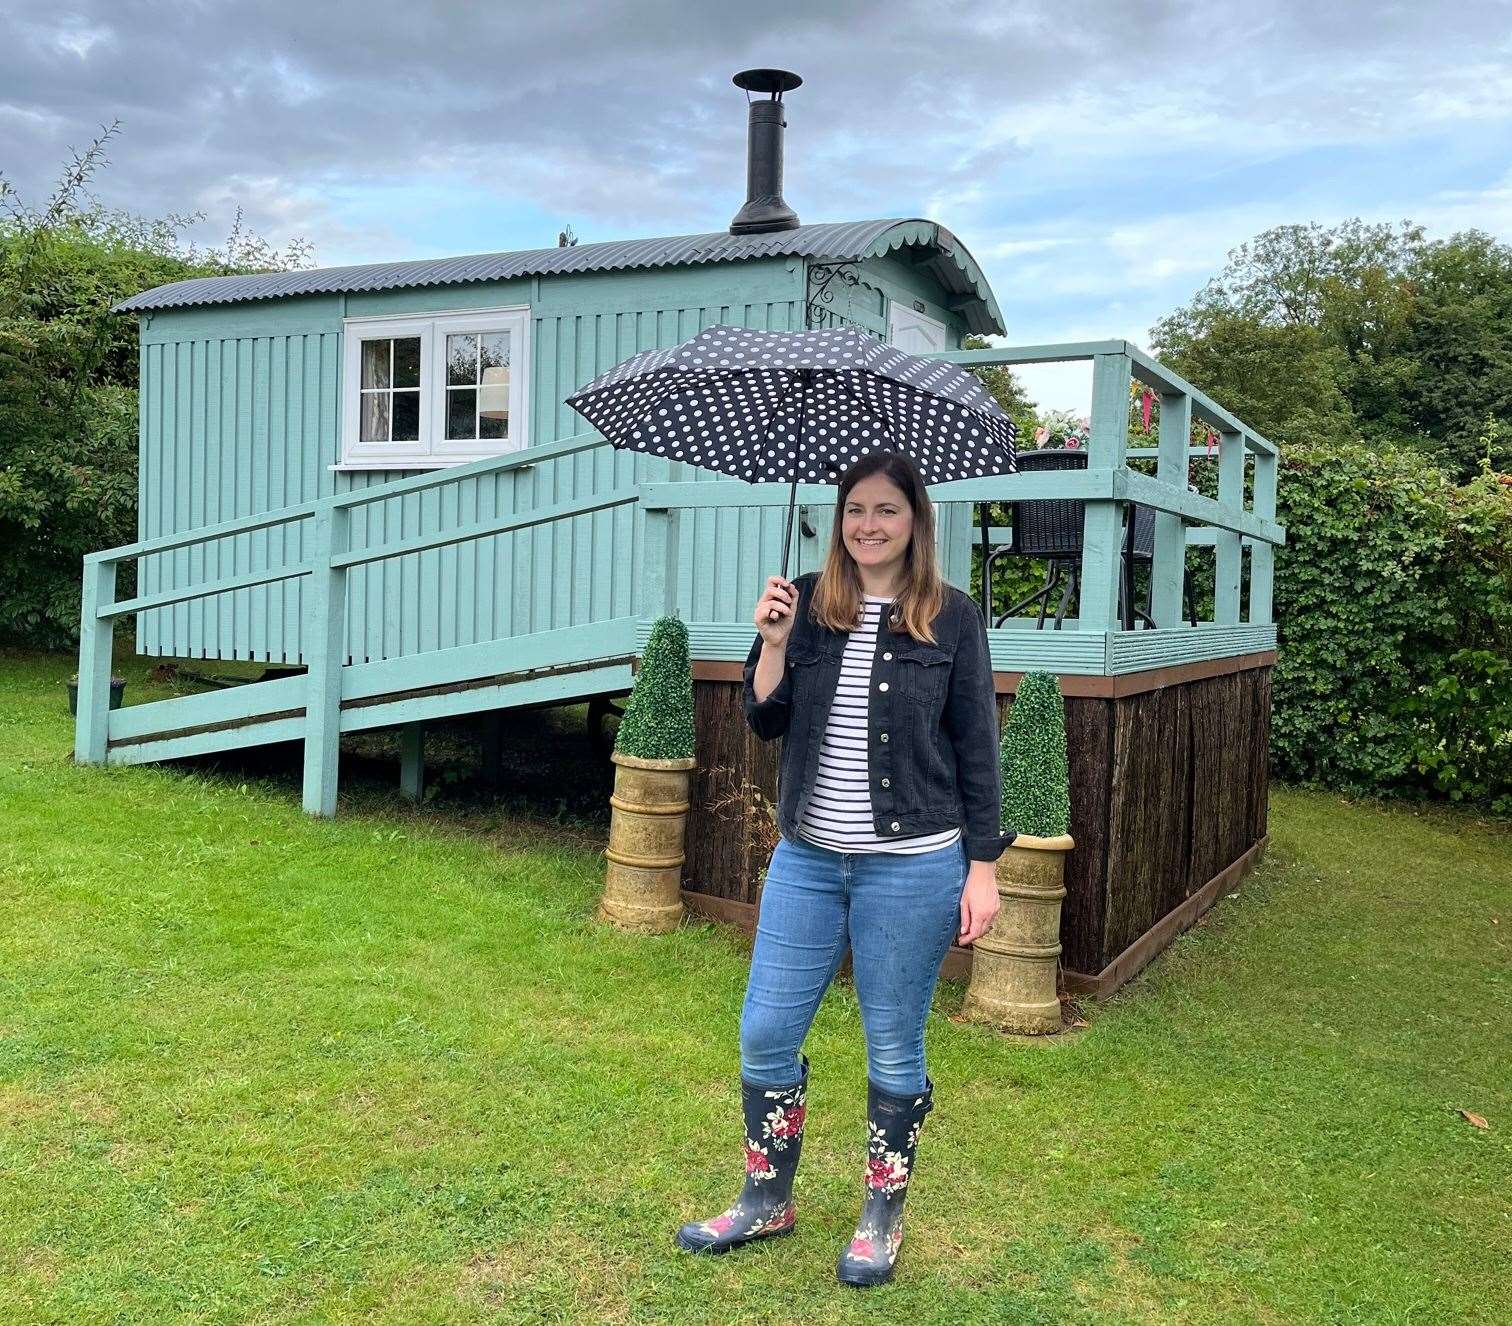 Umbrellas and wellies were definitely needed during this glamping trip